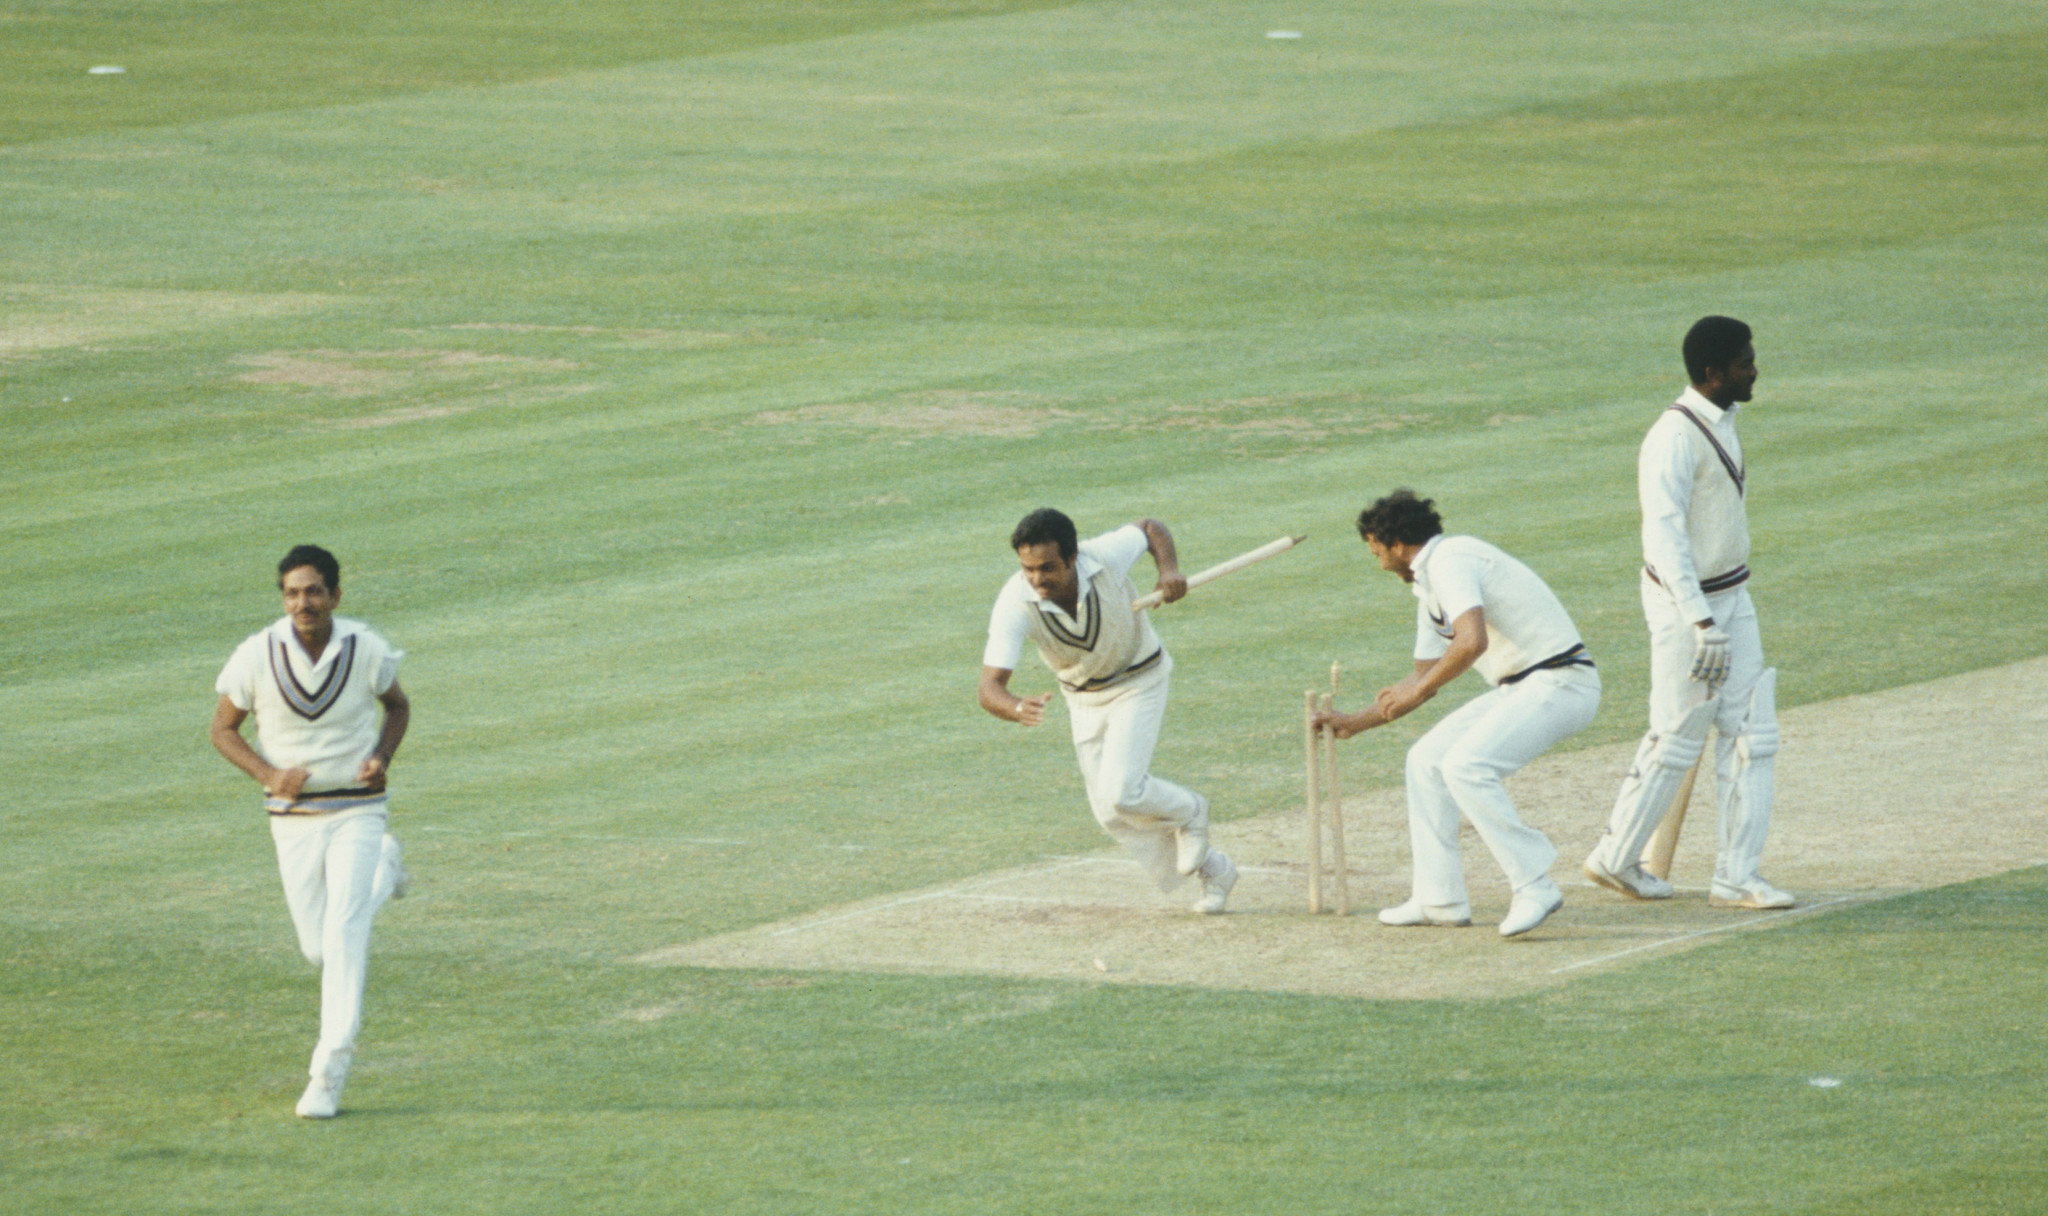 Winning the 1983 World Cup was one of the greatest moments in Indian sporting history ©Getty Images